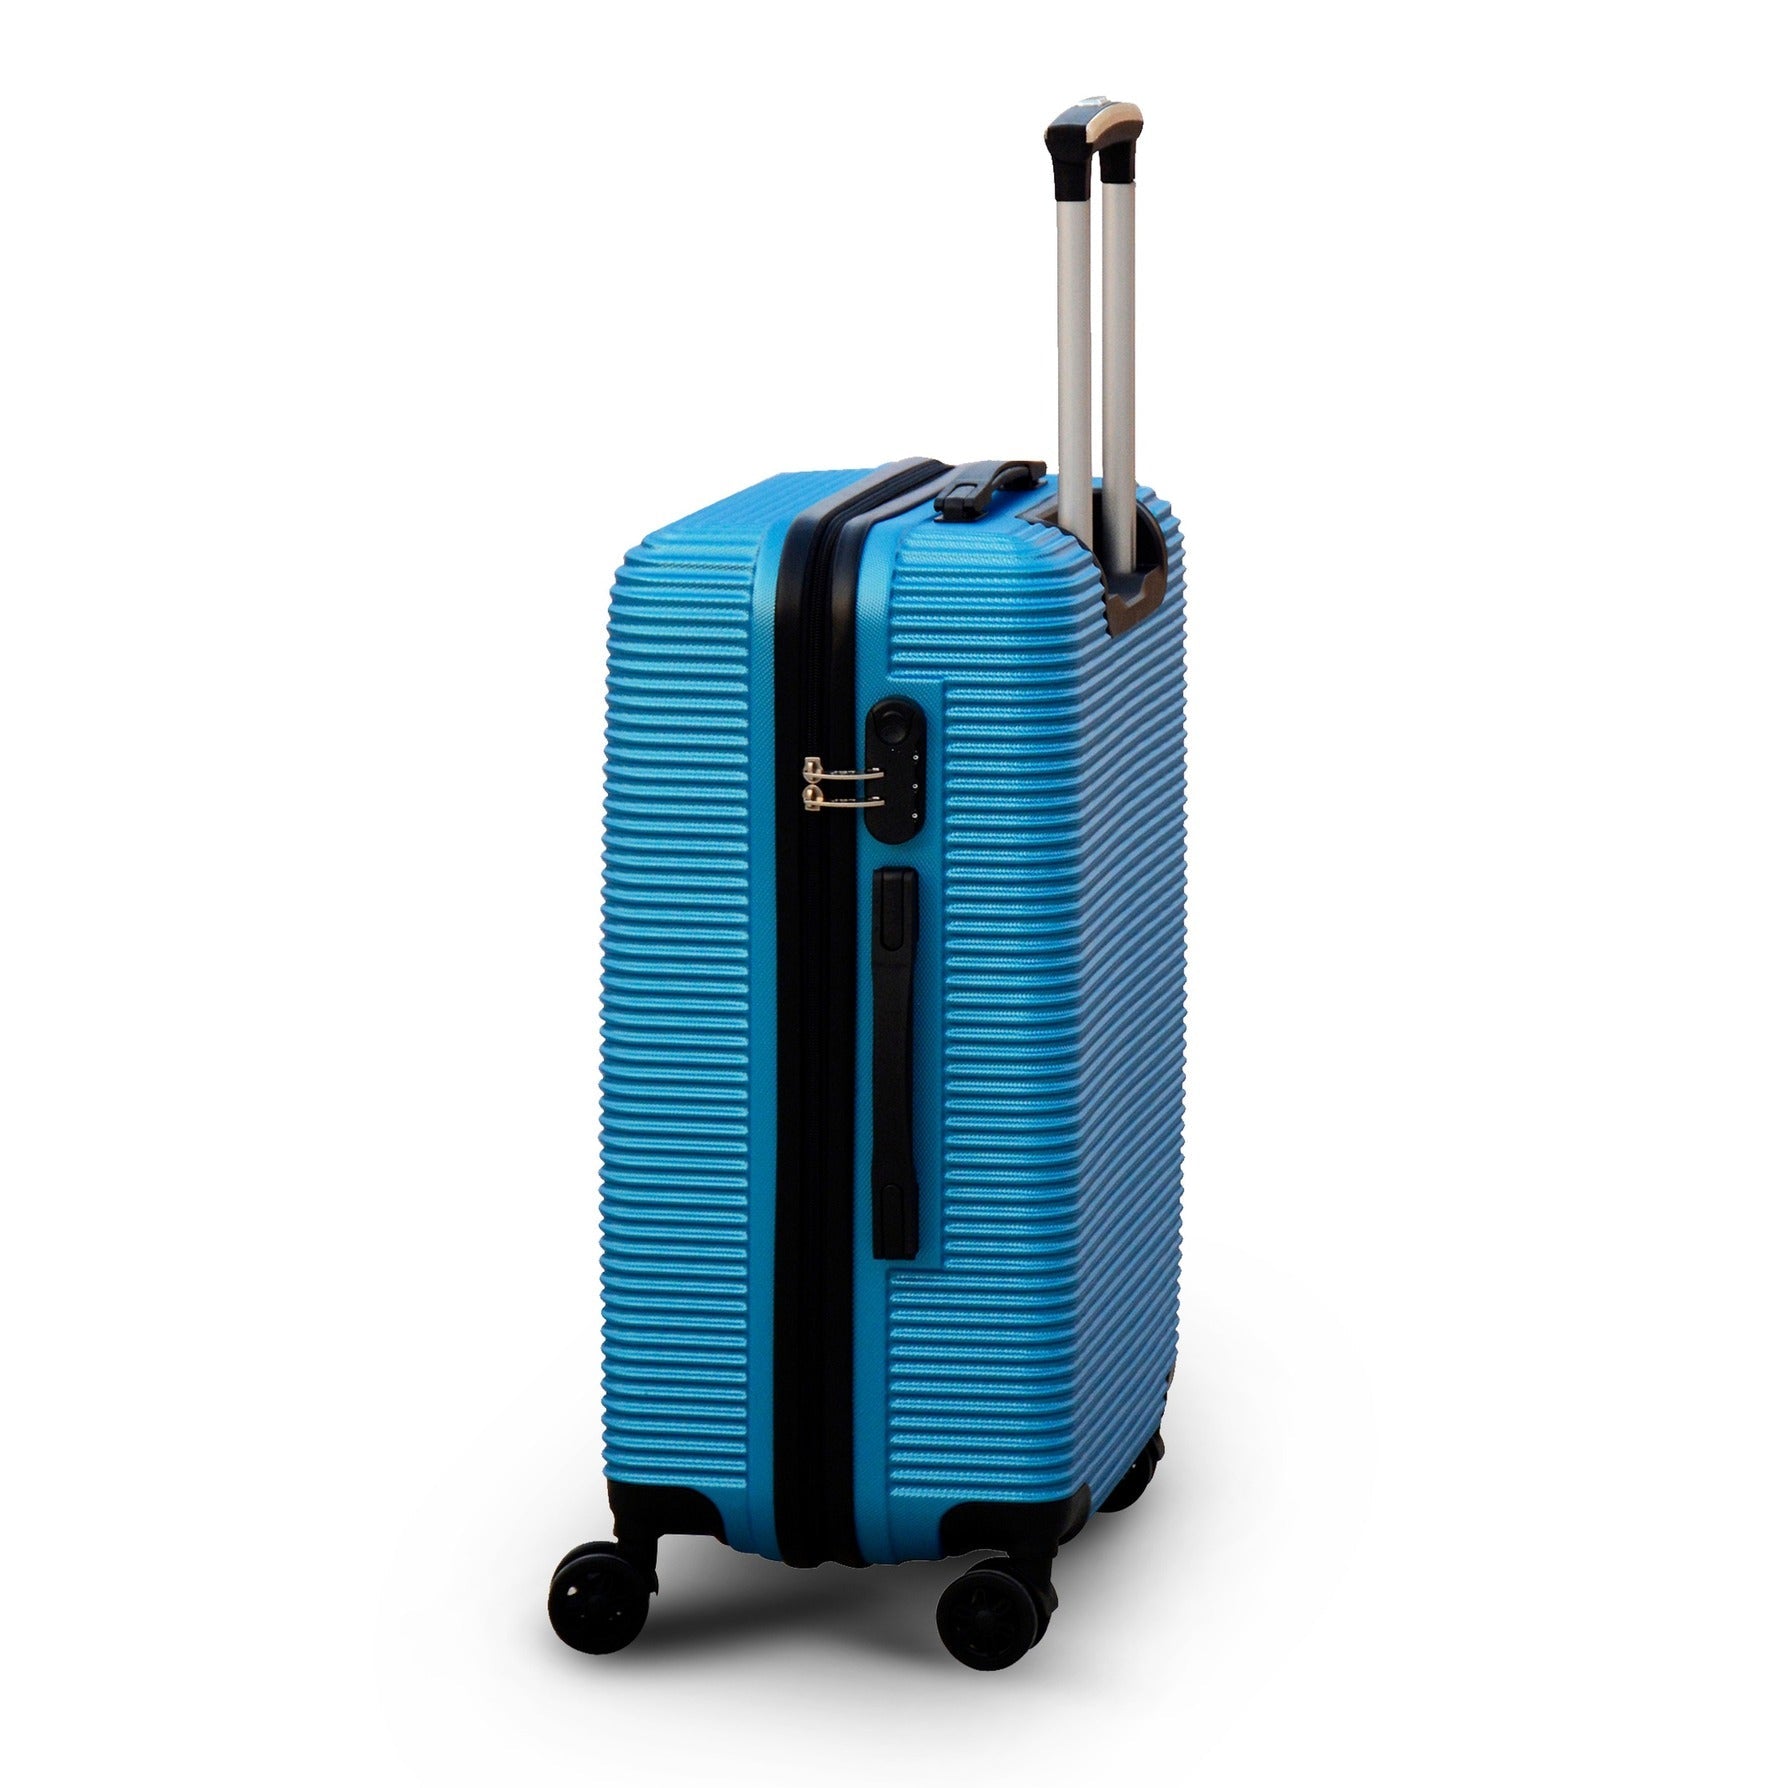 24" Light Blue Colour JIAN ABS Line Luggage Lightweight Hard Case Trolley Bag With Spinner Wheel